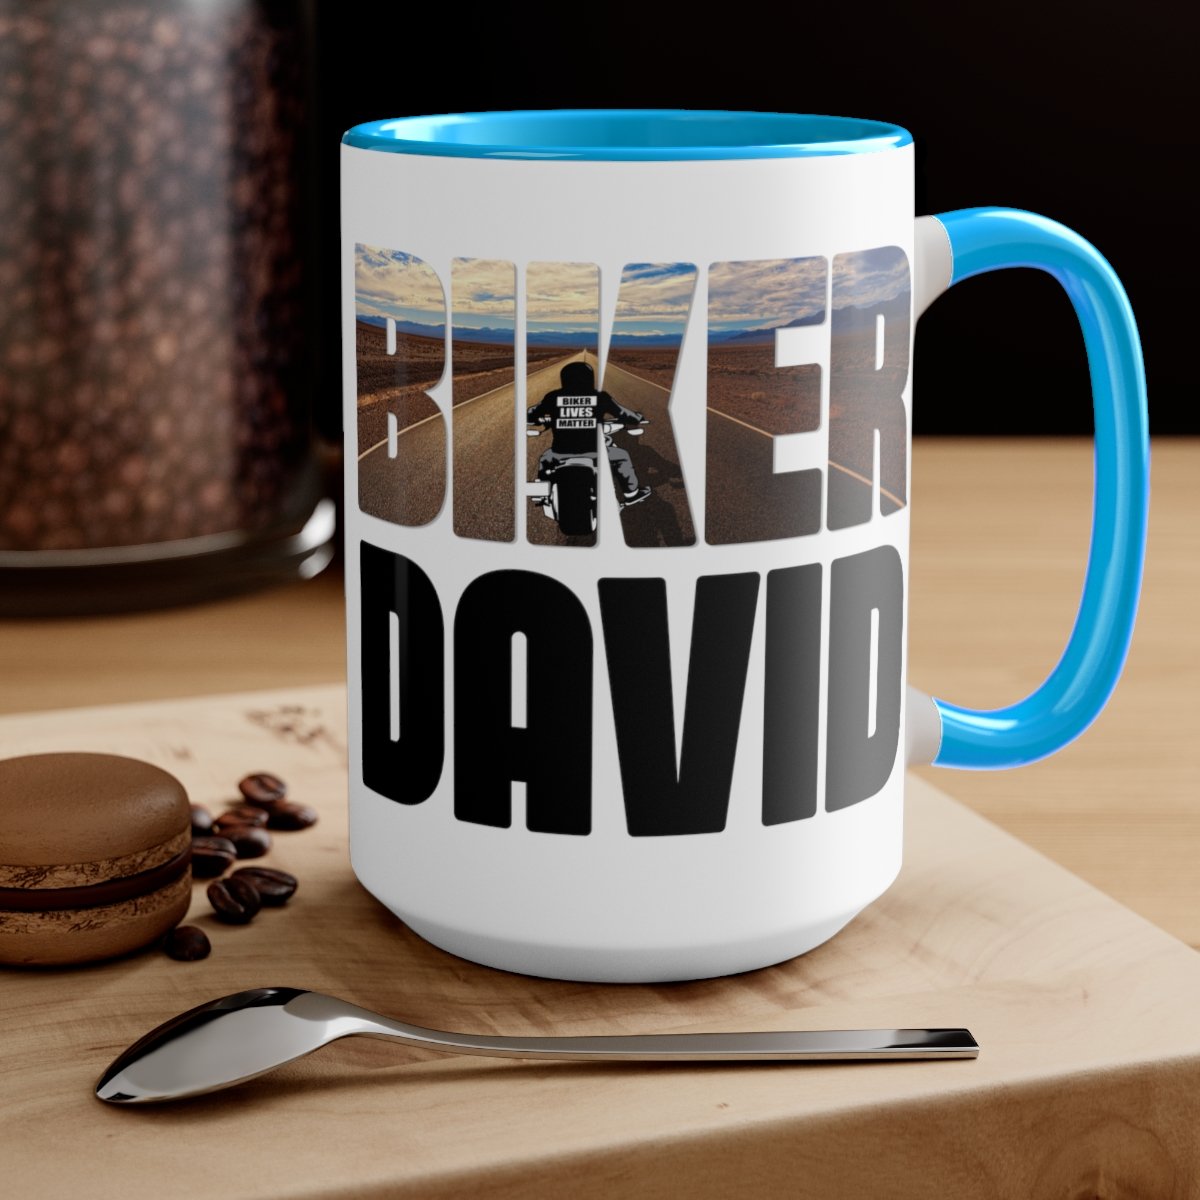 Personalized Name - Two-Tone Coffee Mugs - 15oz - Choice Of Colors